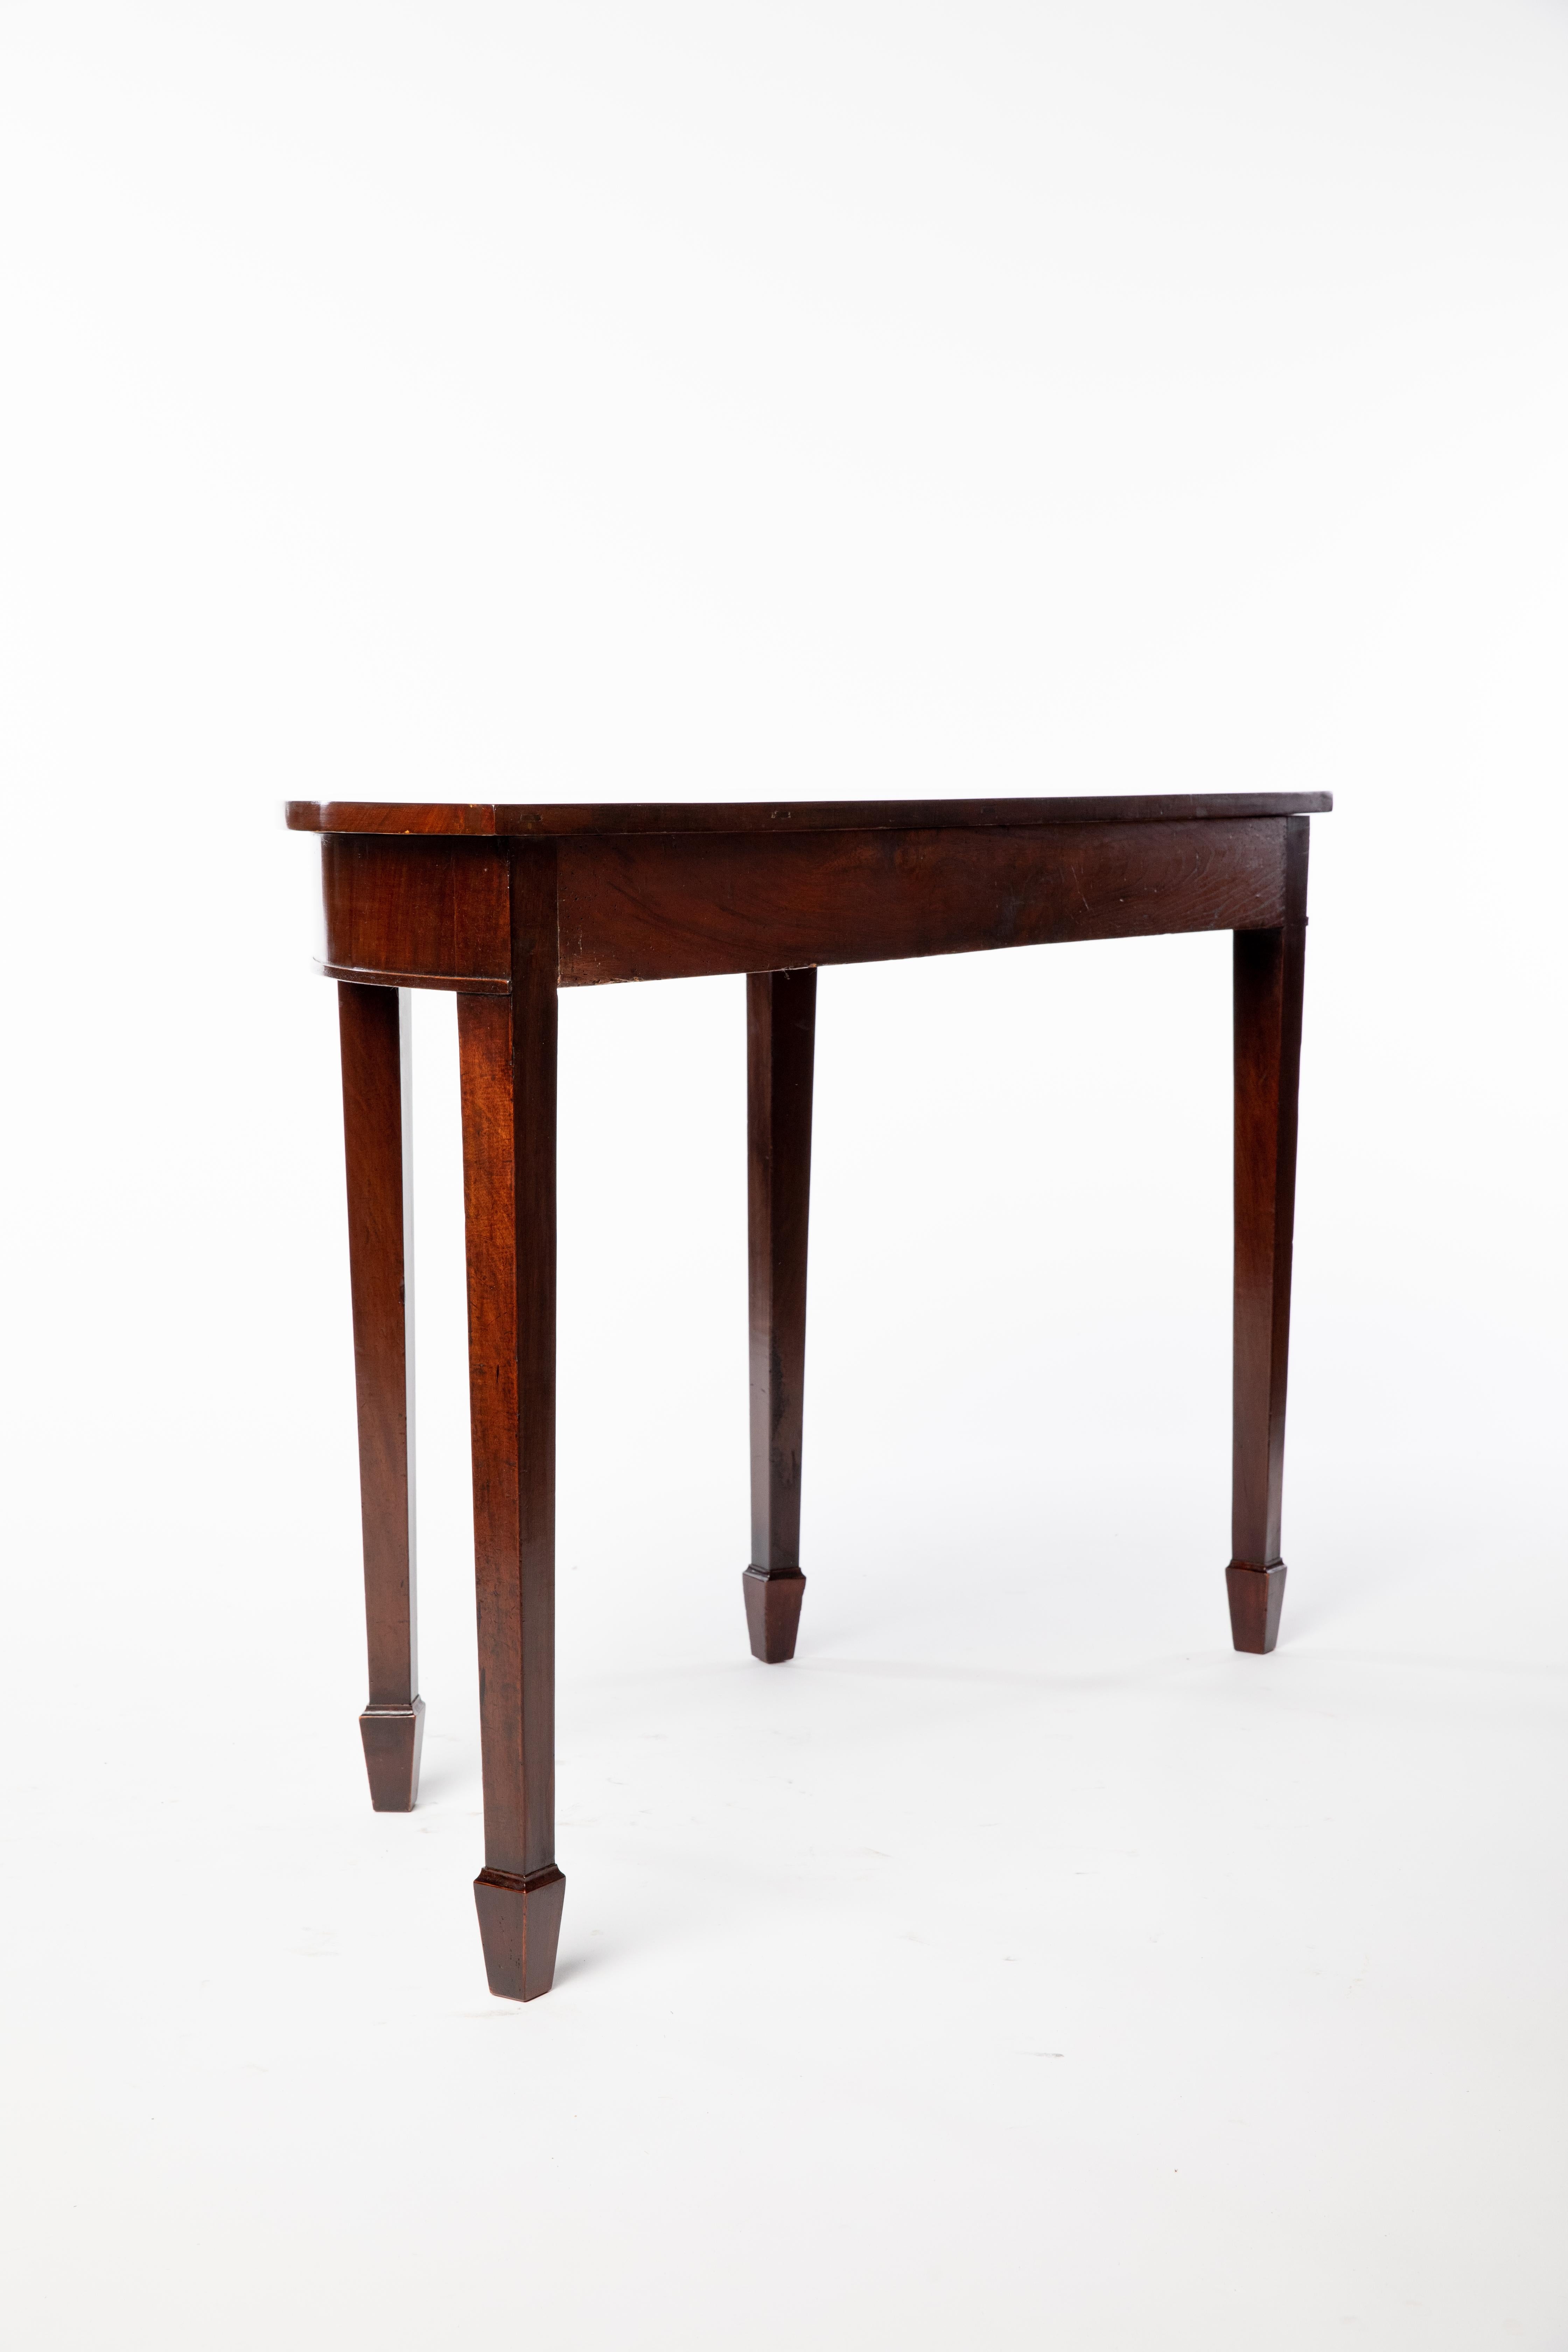 Vintage Mahogany Demilune Table on Spade Feet In Good Condition For Sale In Houston, TX